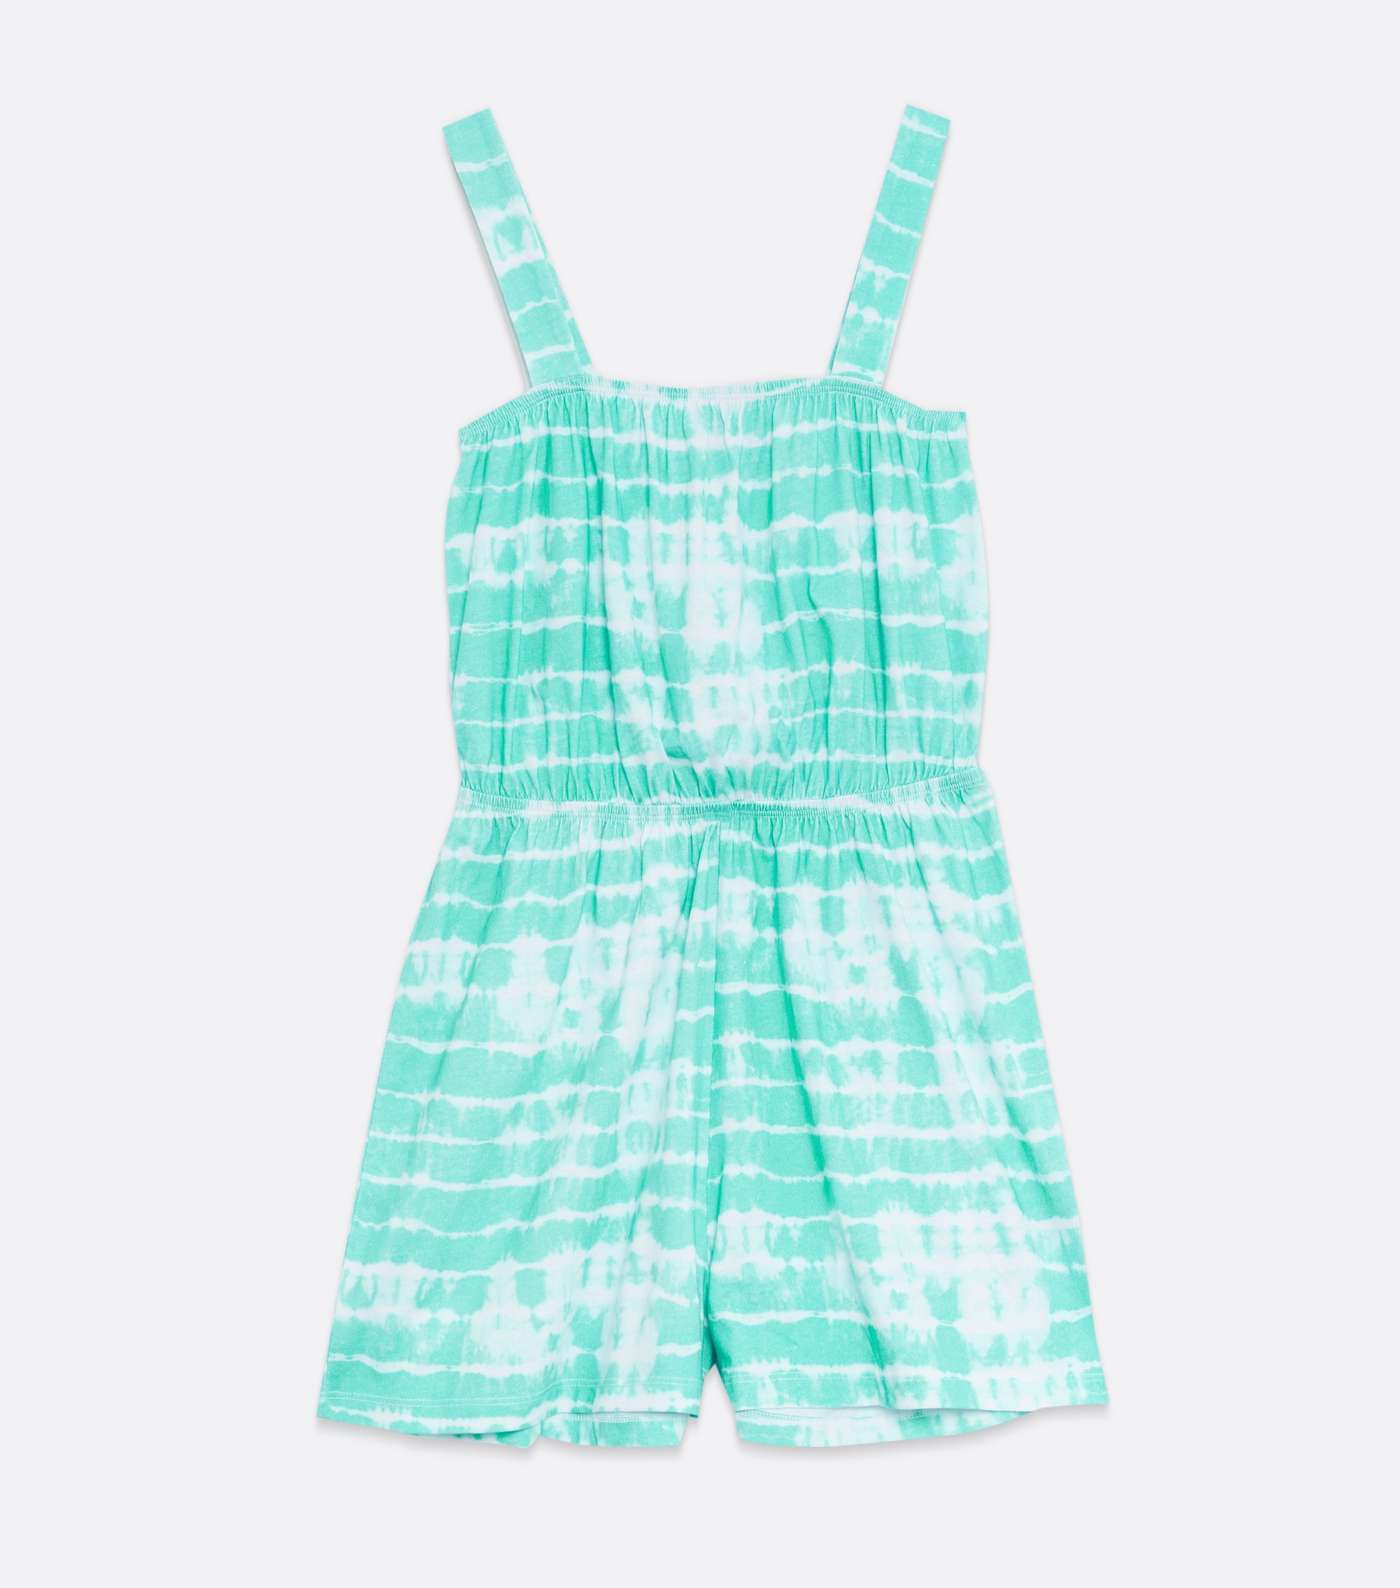 Girls Turquoise Tie Dye Jersey Beach Playsuit Image 5